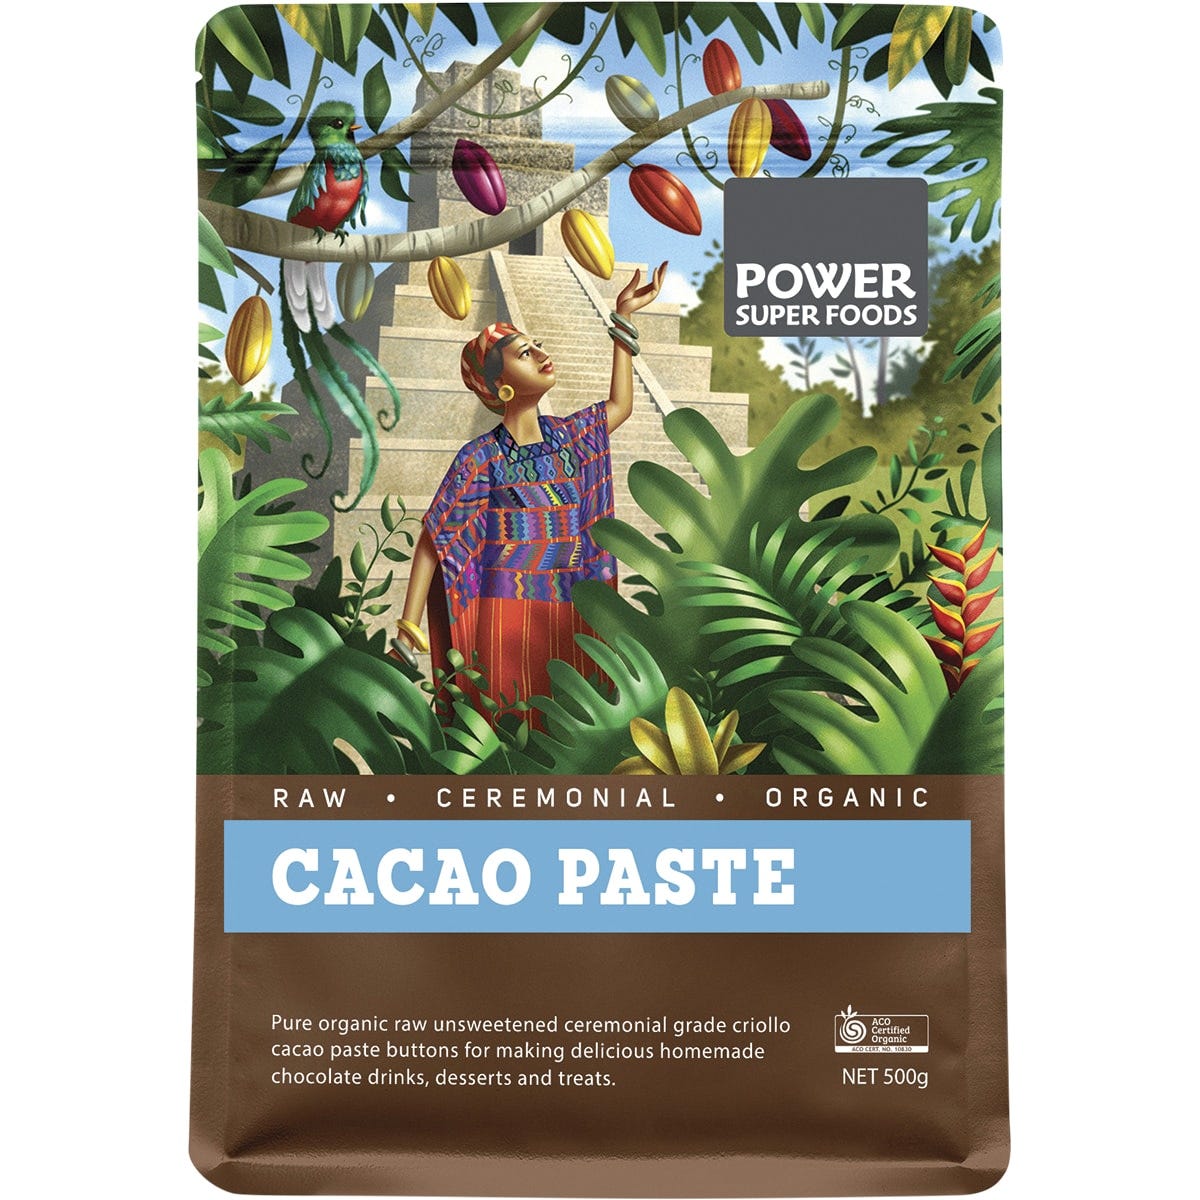 Power Super Foods Cacao Paste Buttons The Origin Series 500g - Dr Earth - Cacao